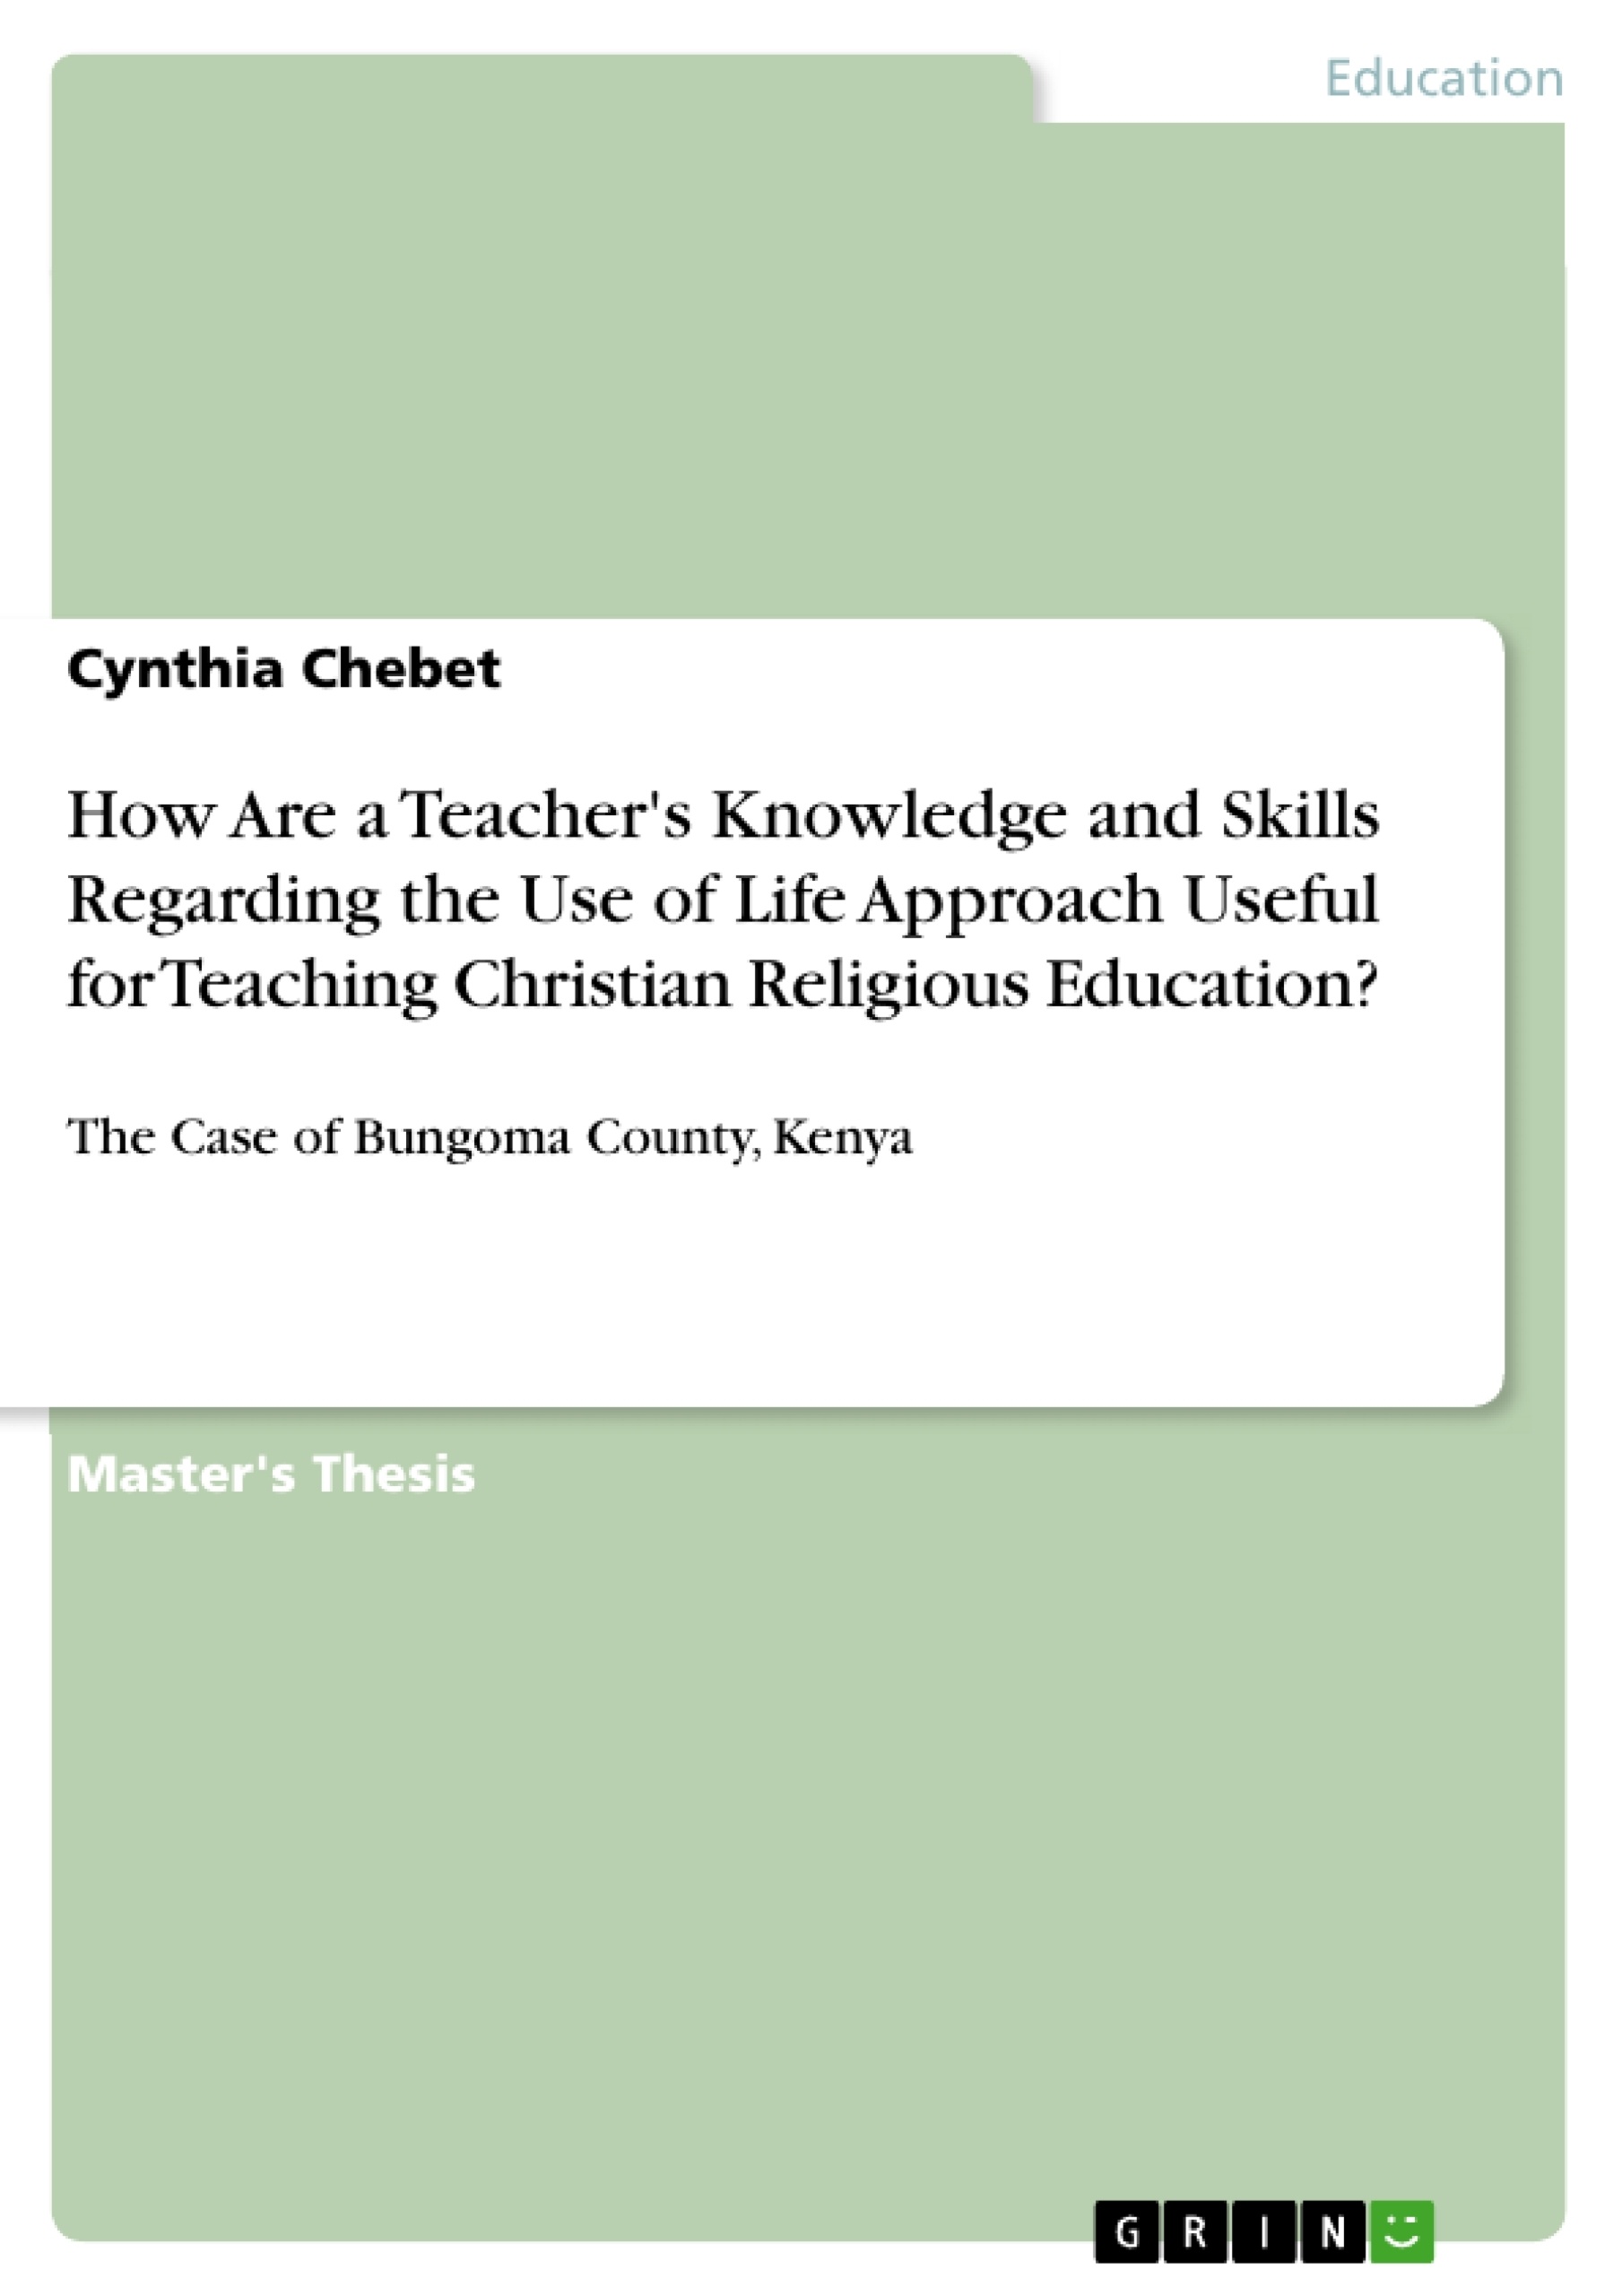 Titre: How Are a Teacher's Knowledge and Skills Regarding the Use of Life Approach Useful for Teaching Christian Religious Education?